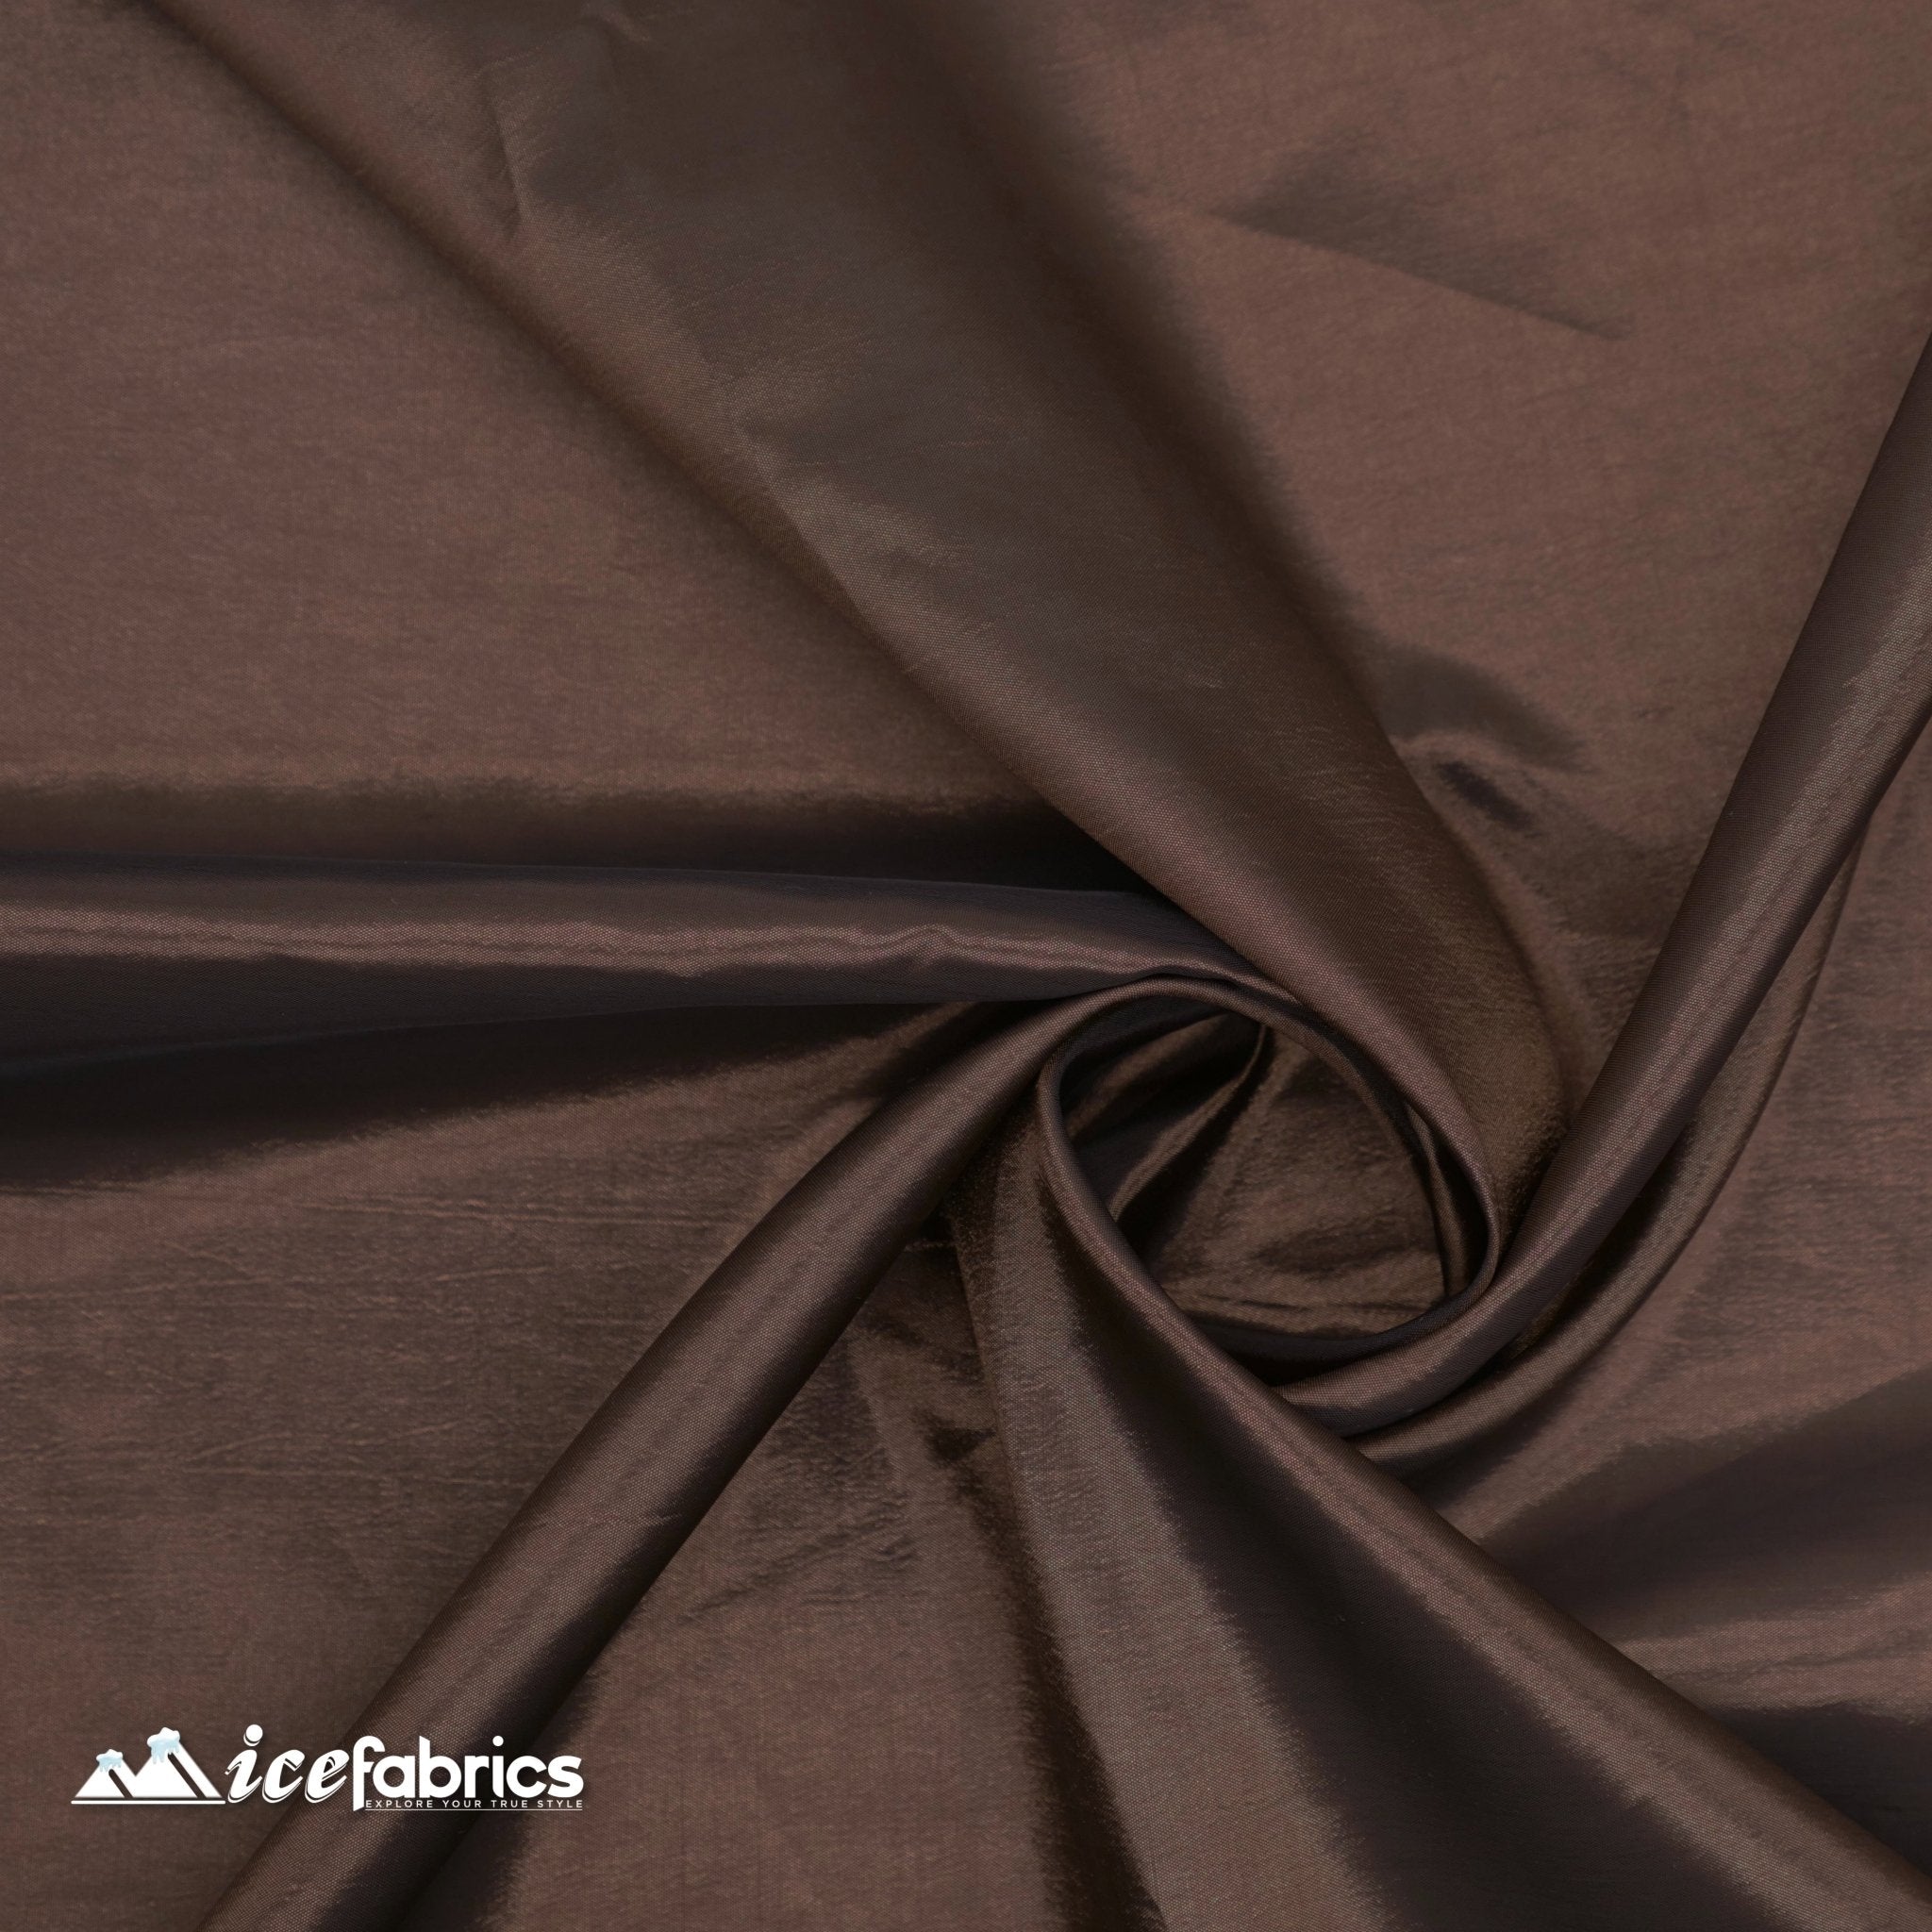 High Quality Solid Taffeta Fabric_ 60" Width_ By The YardTaffeta FabricICEFABRICICE FABRICSYellowHigh Quality Solid Taffeta Fabric_ 60" Width_ By The YardTaffeta FabricICEFABRICICE FABRICSBrownHigh Quality Solid Taffeta Fabric_ 60" Width_ By The Yard ICEFABRIC Brown